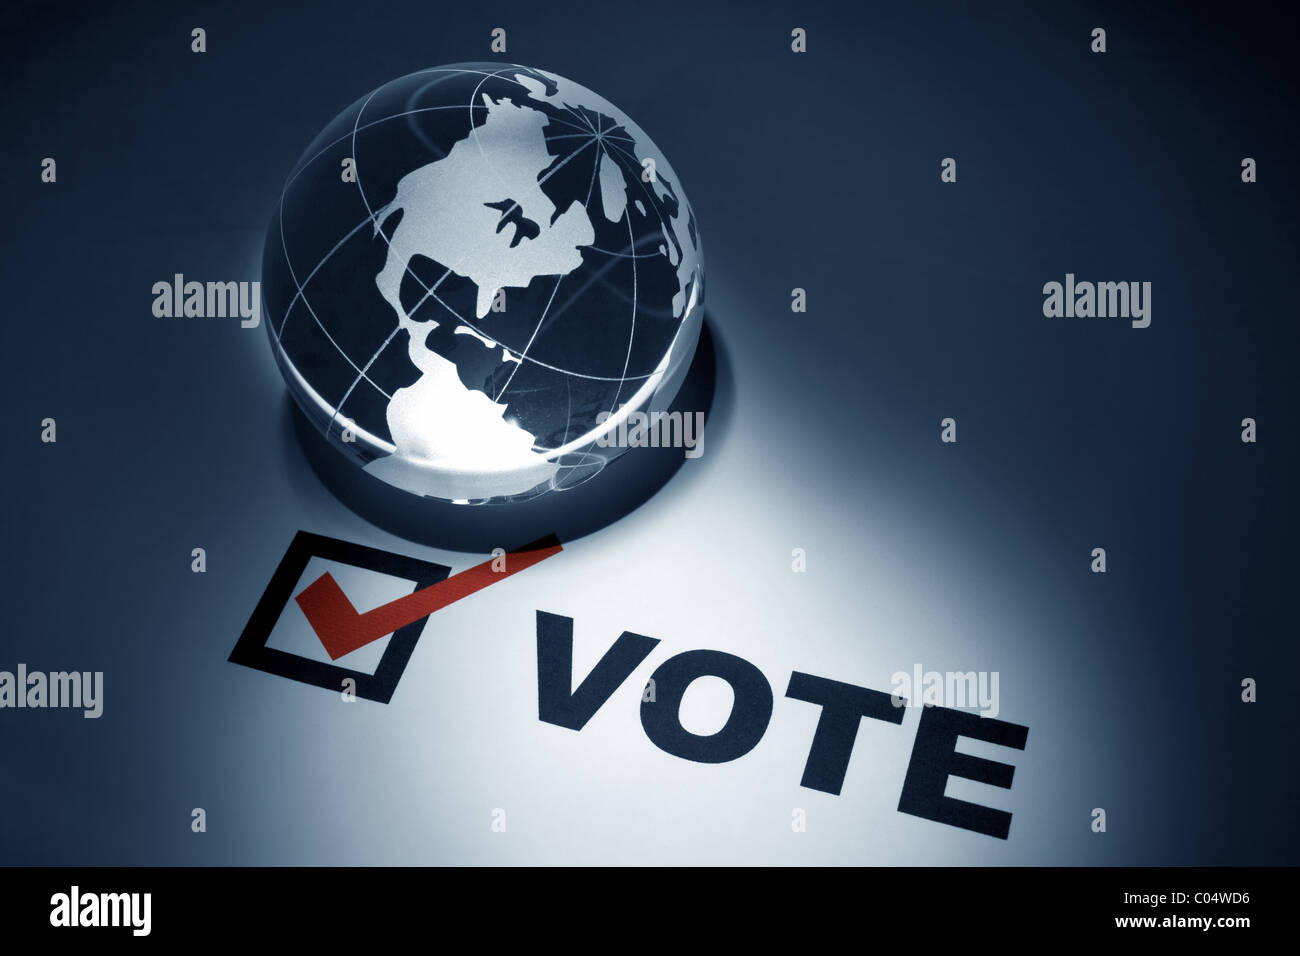 Globe and Voting, concept of Global Communications Stock Photo